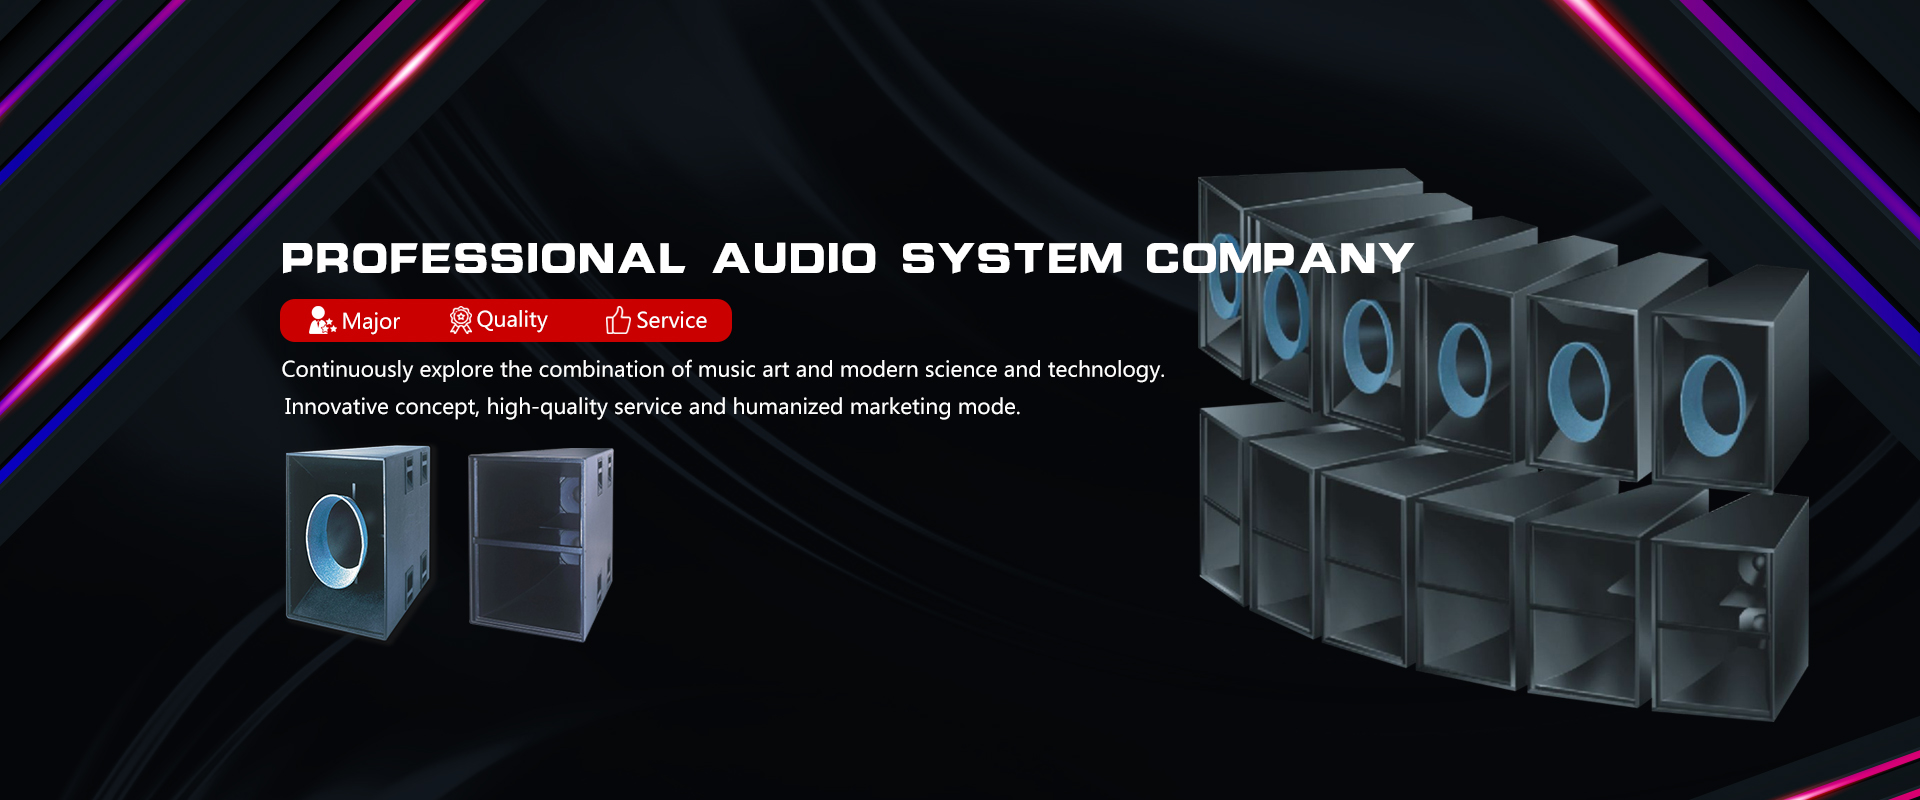 Professional Audio Systems